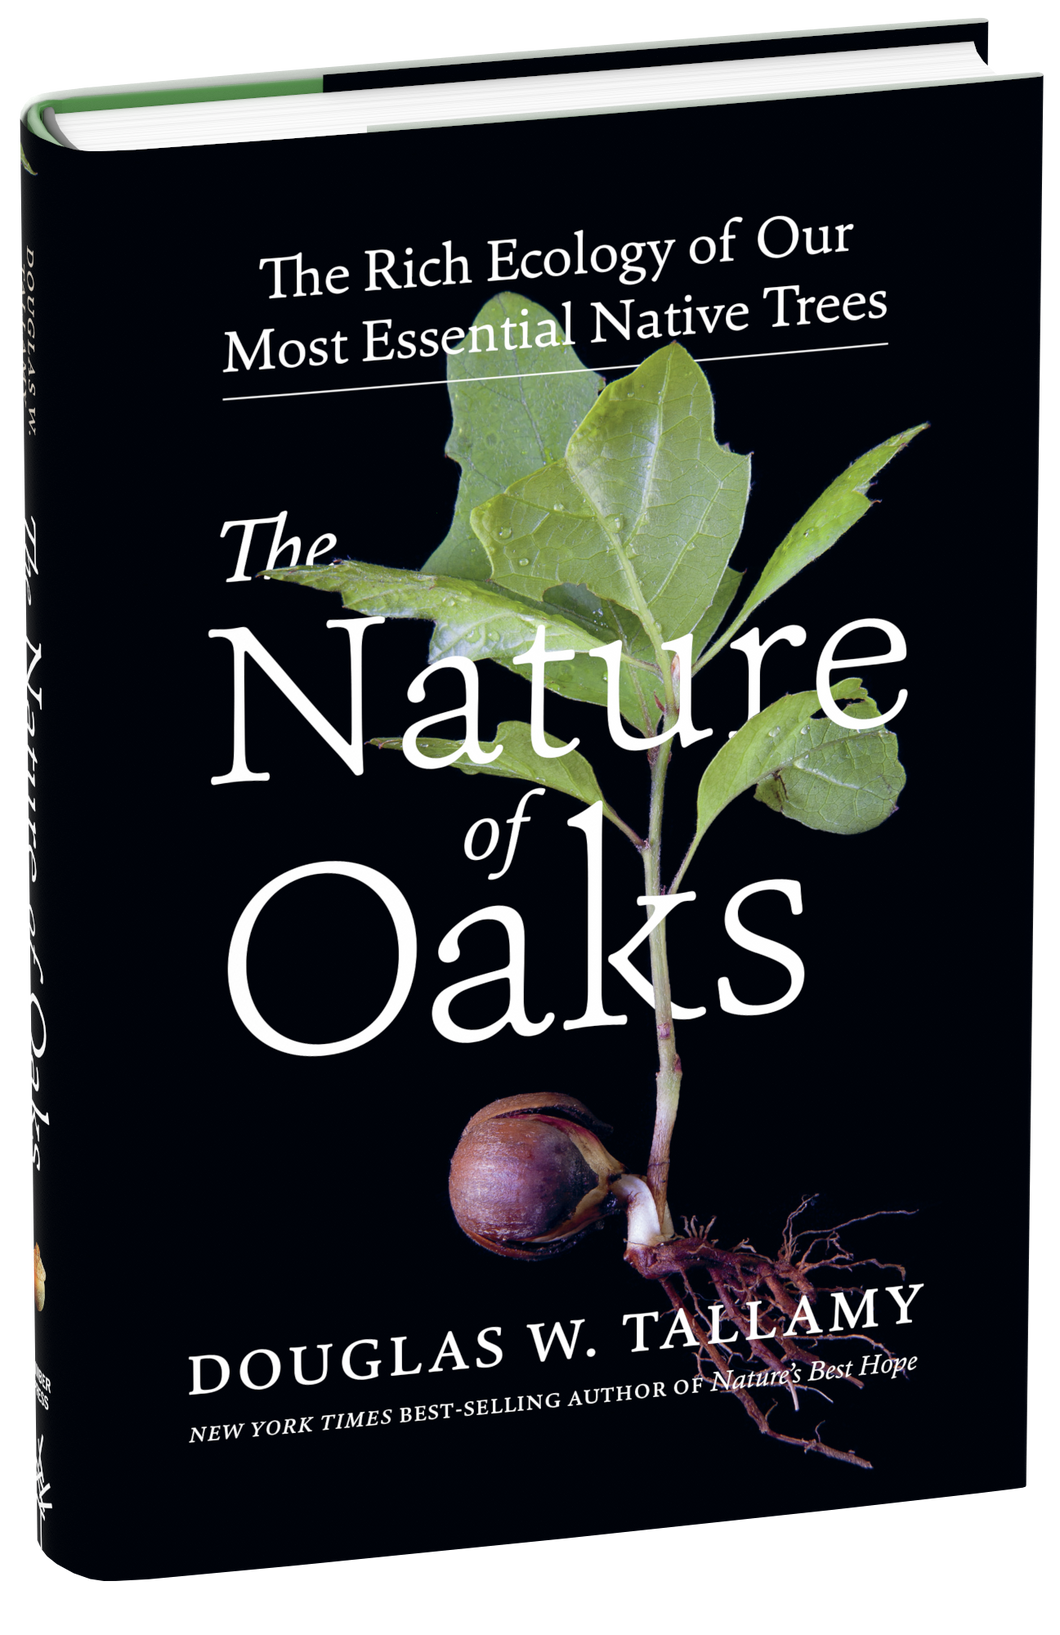 THE NATURE OF OAKS